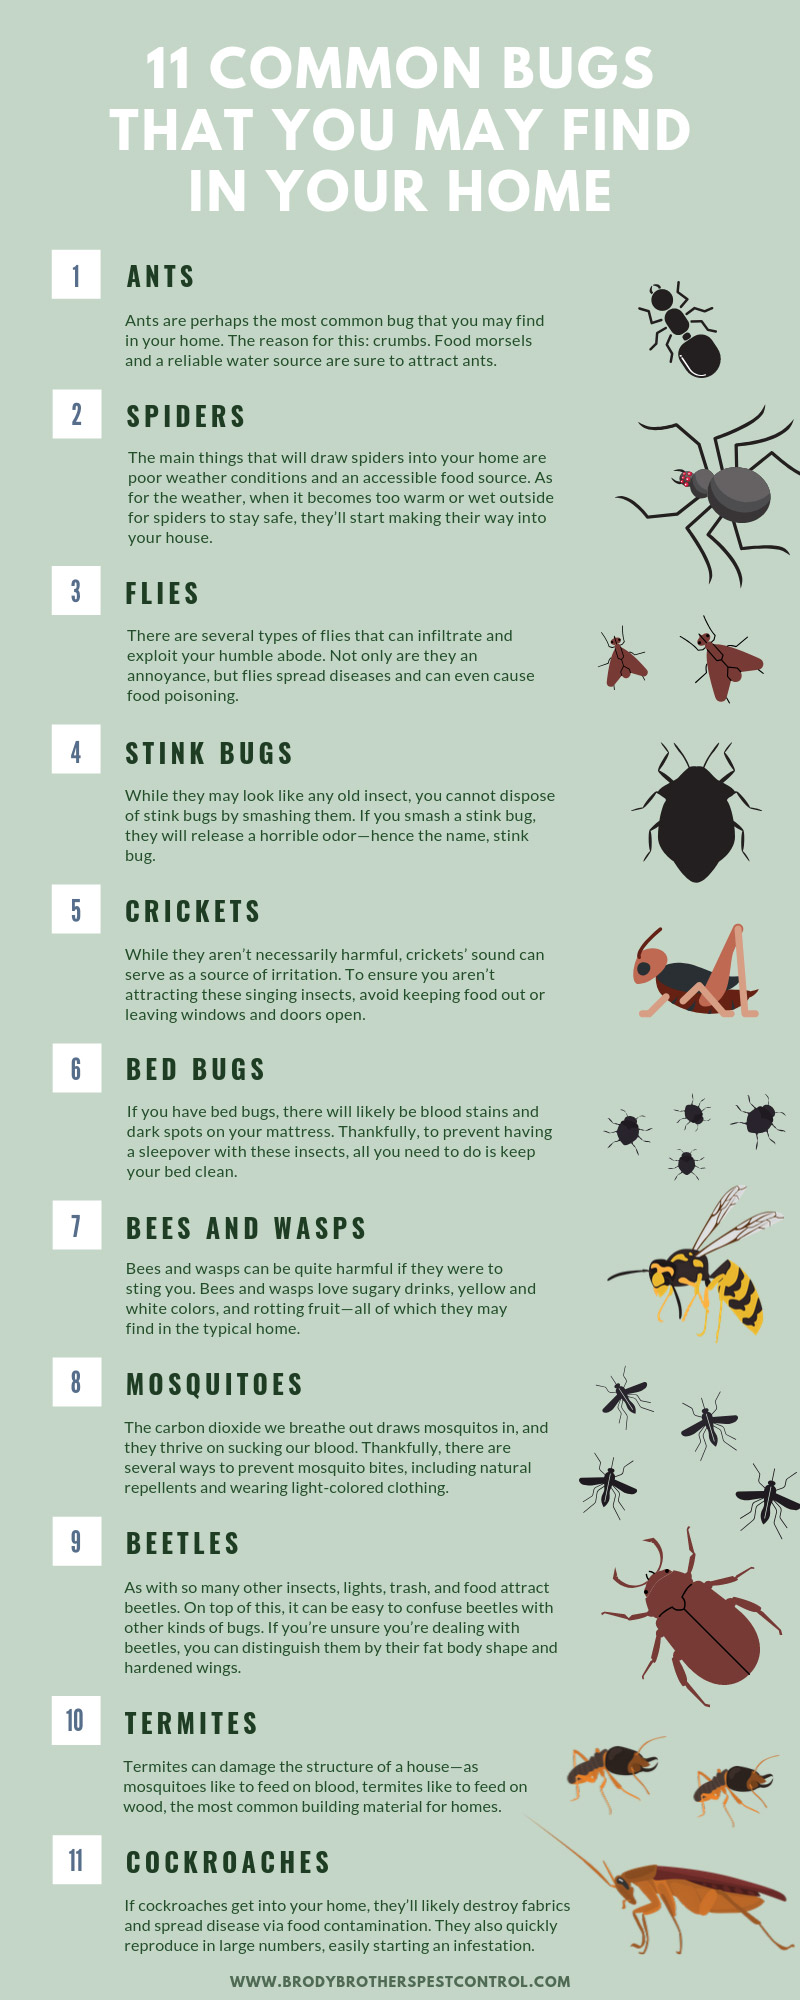 11 Common Bugs That You May Find in Your Home infographic